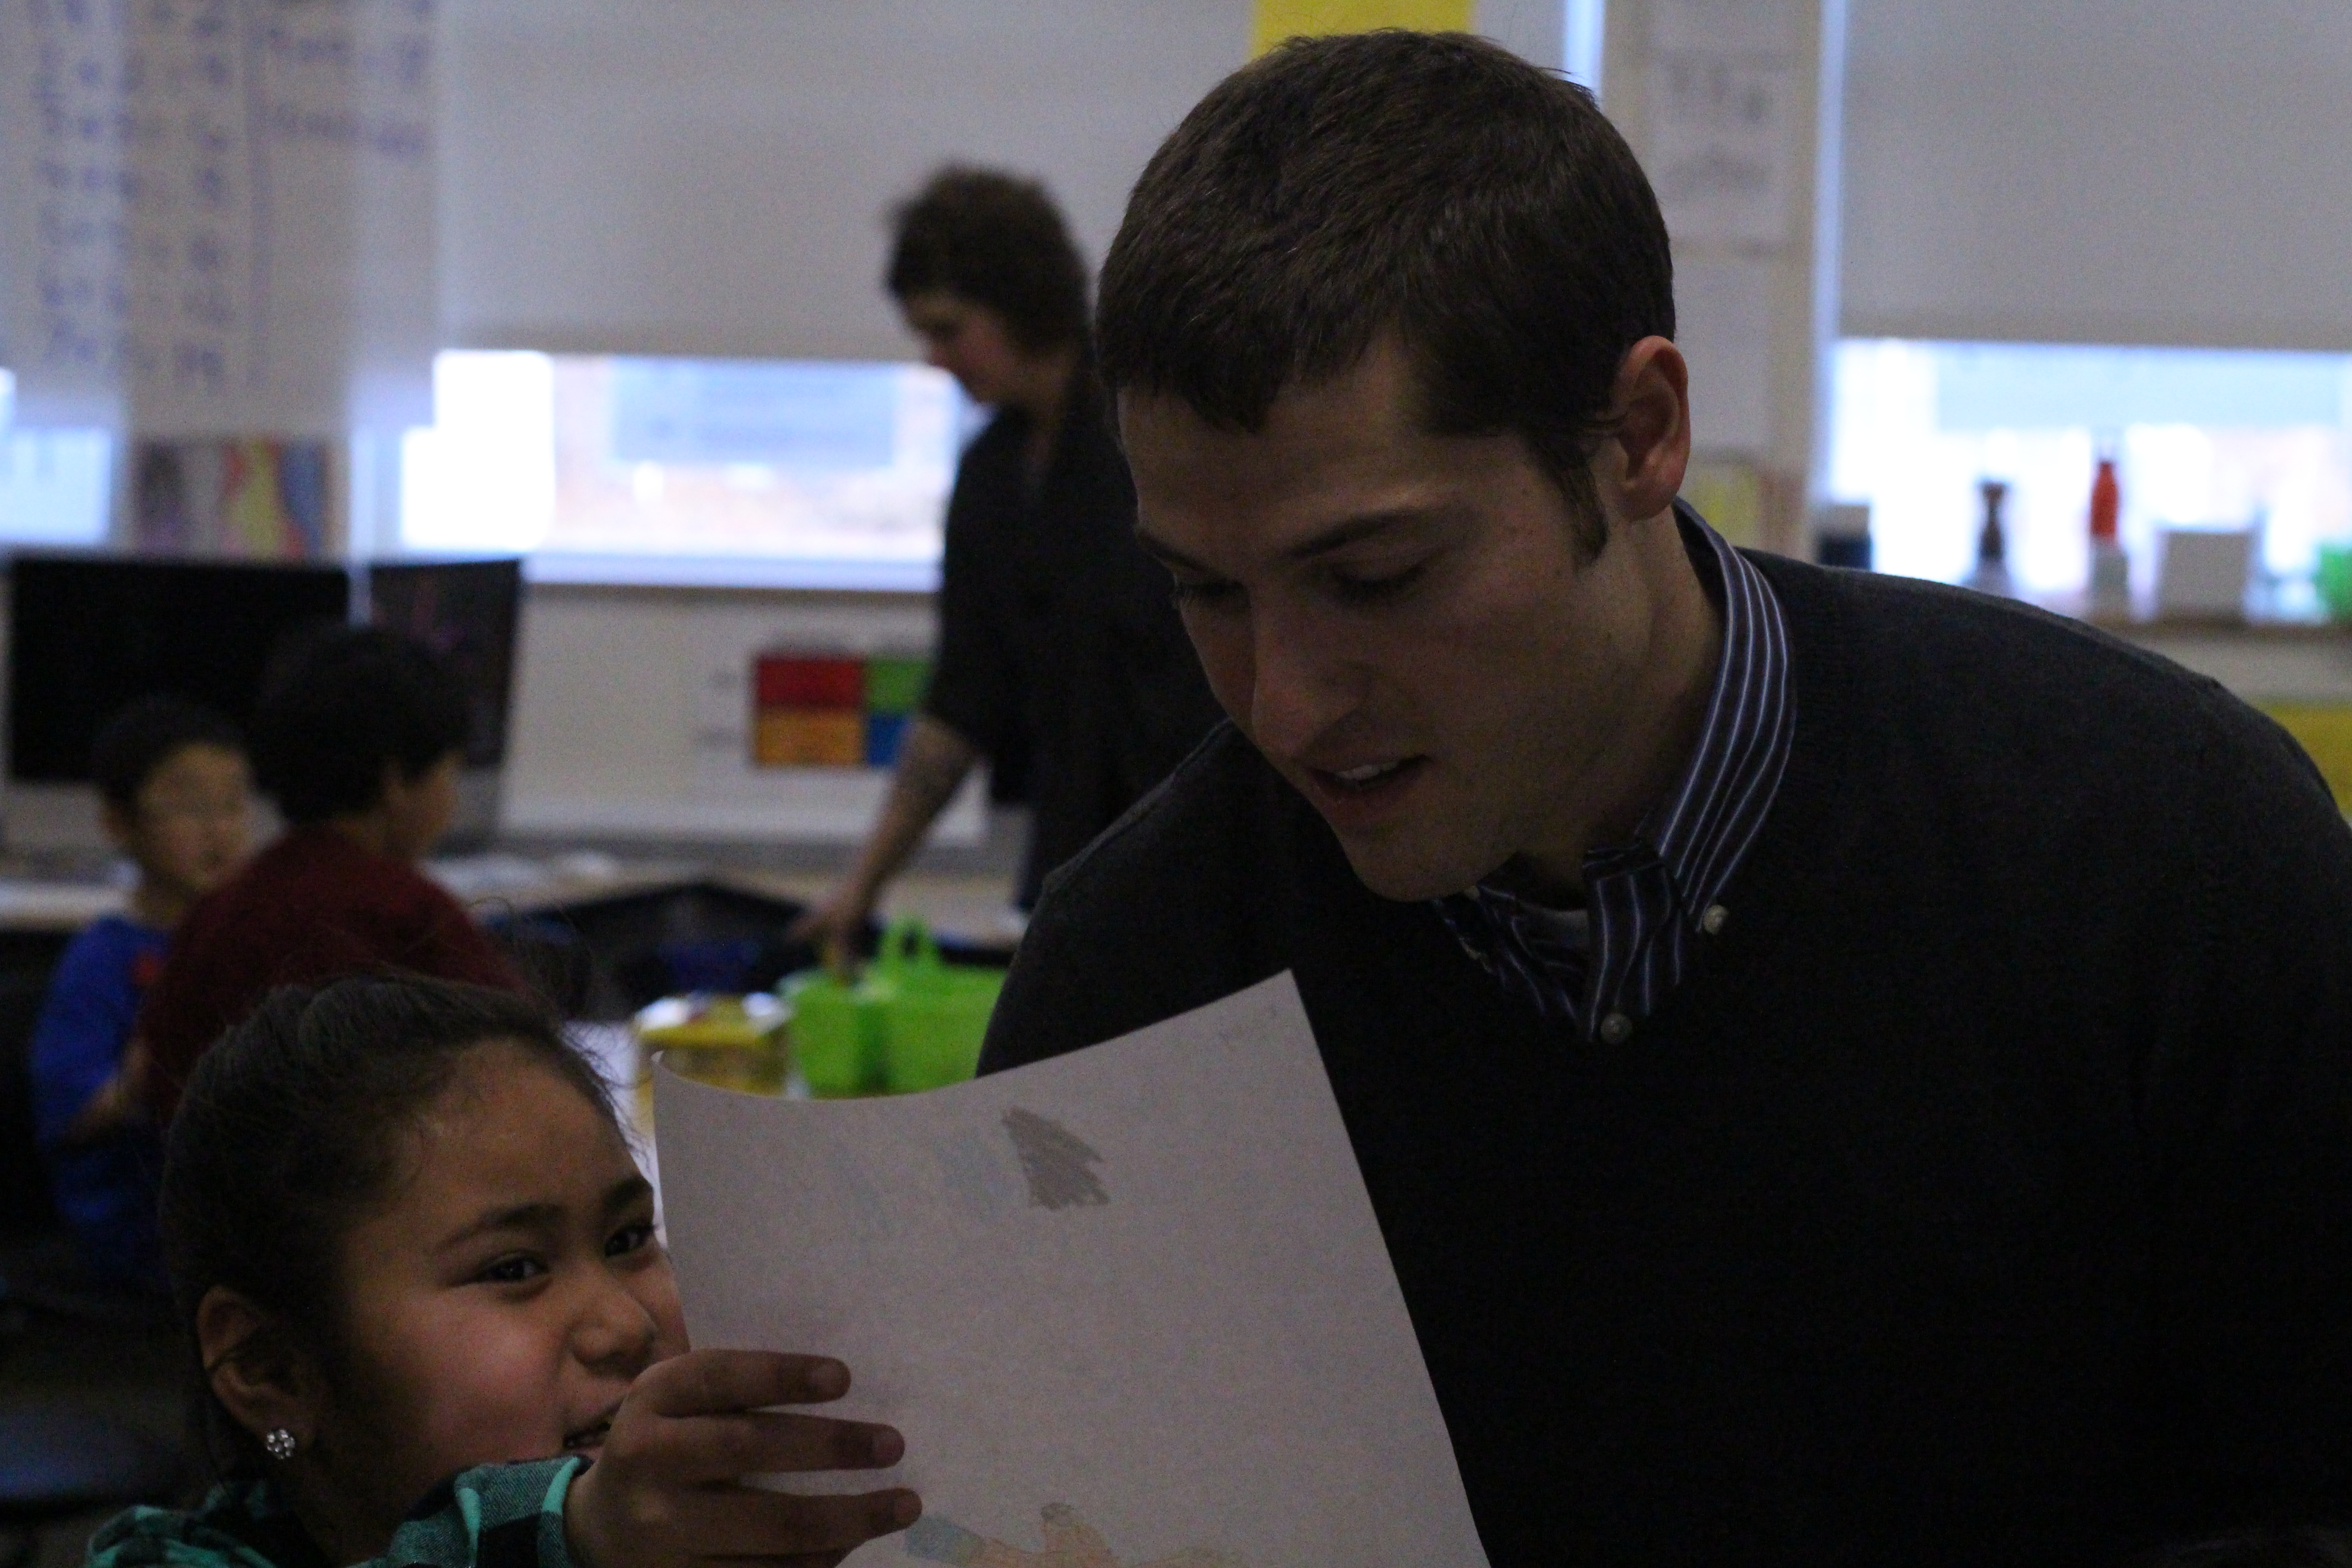 One of Paul Campbell's students shows him a drawing she made. (Photo by Wesley Early, Alaska Public Media - Anchorage)